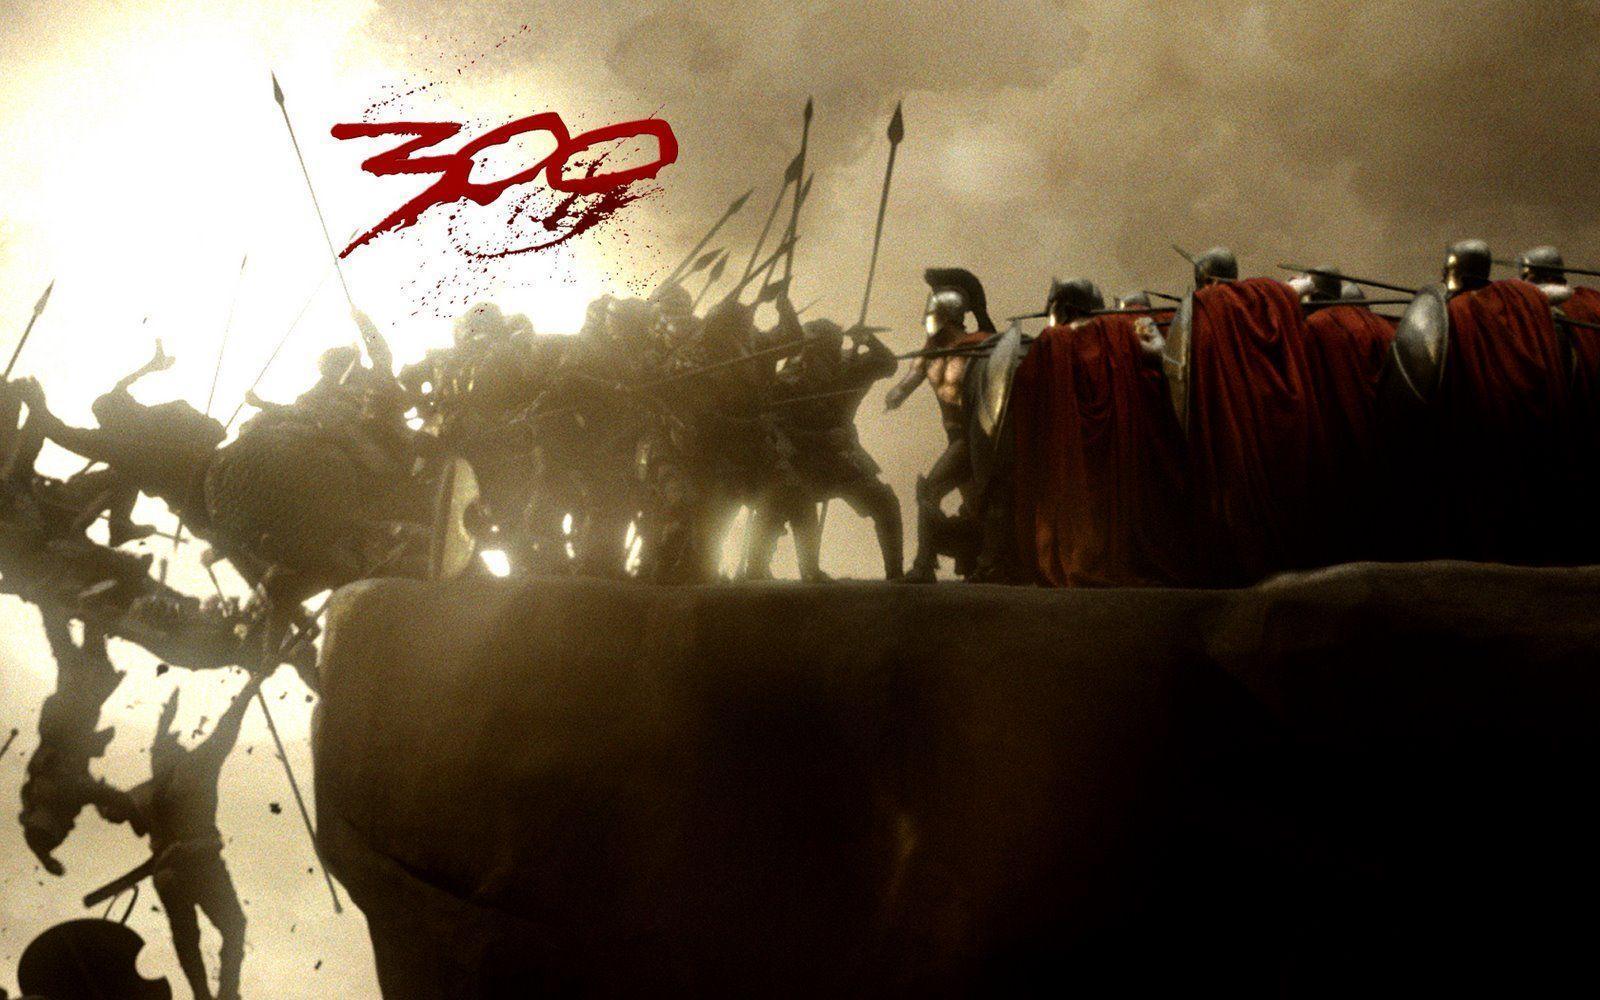 300 Spartans Wallpapers